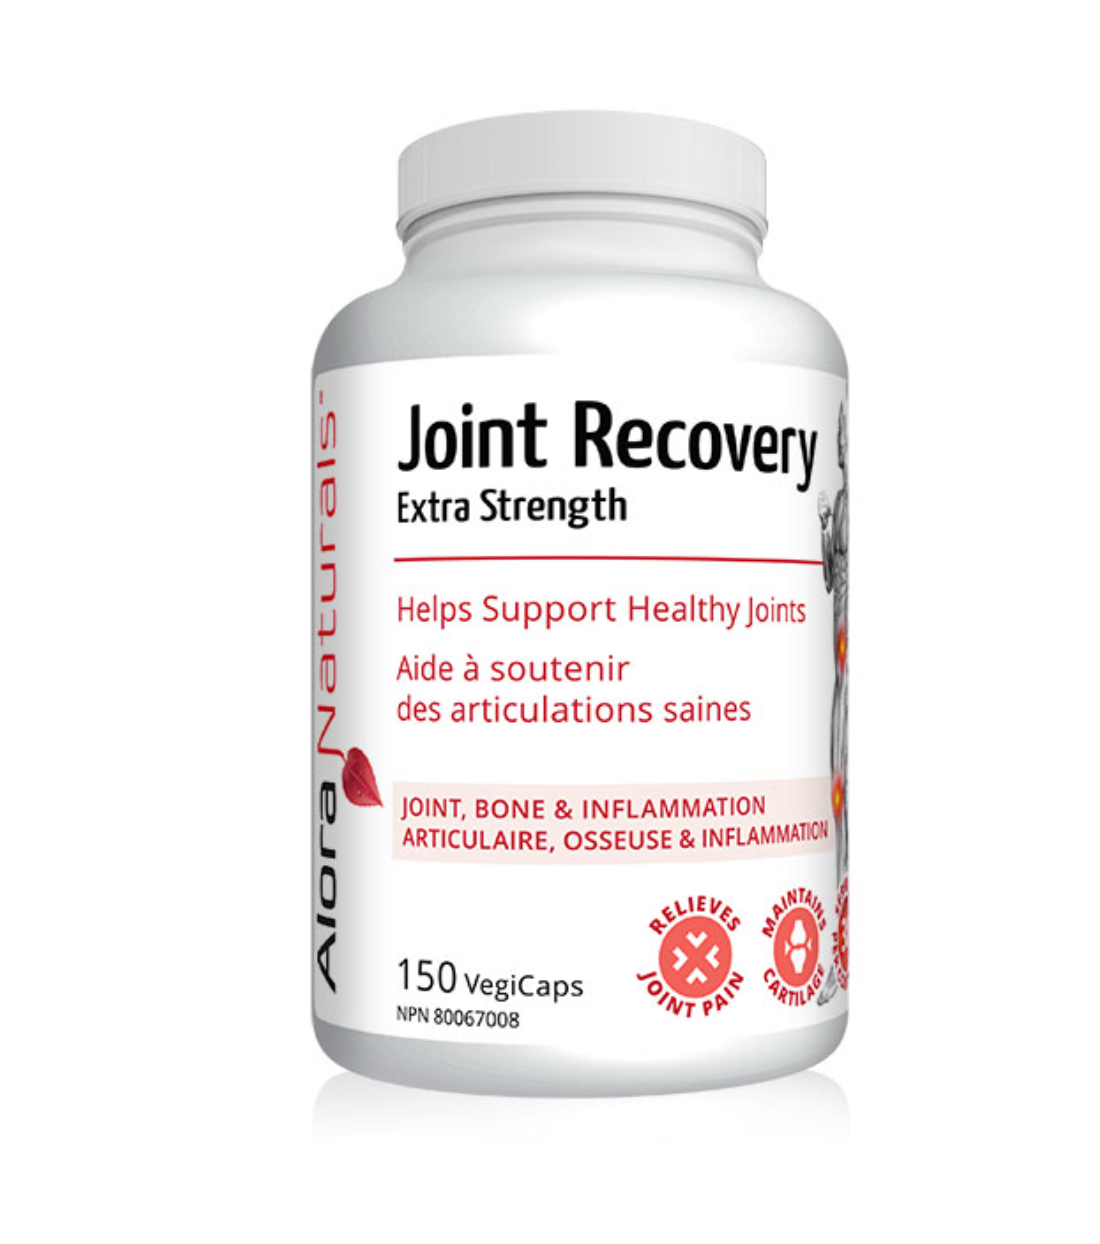 Alora Naturals Joint Recovery